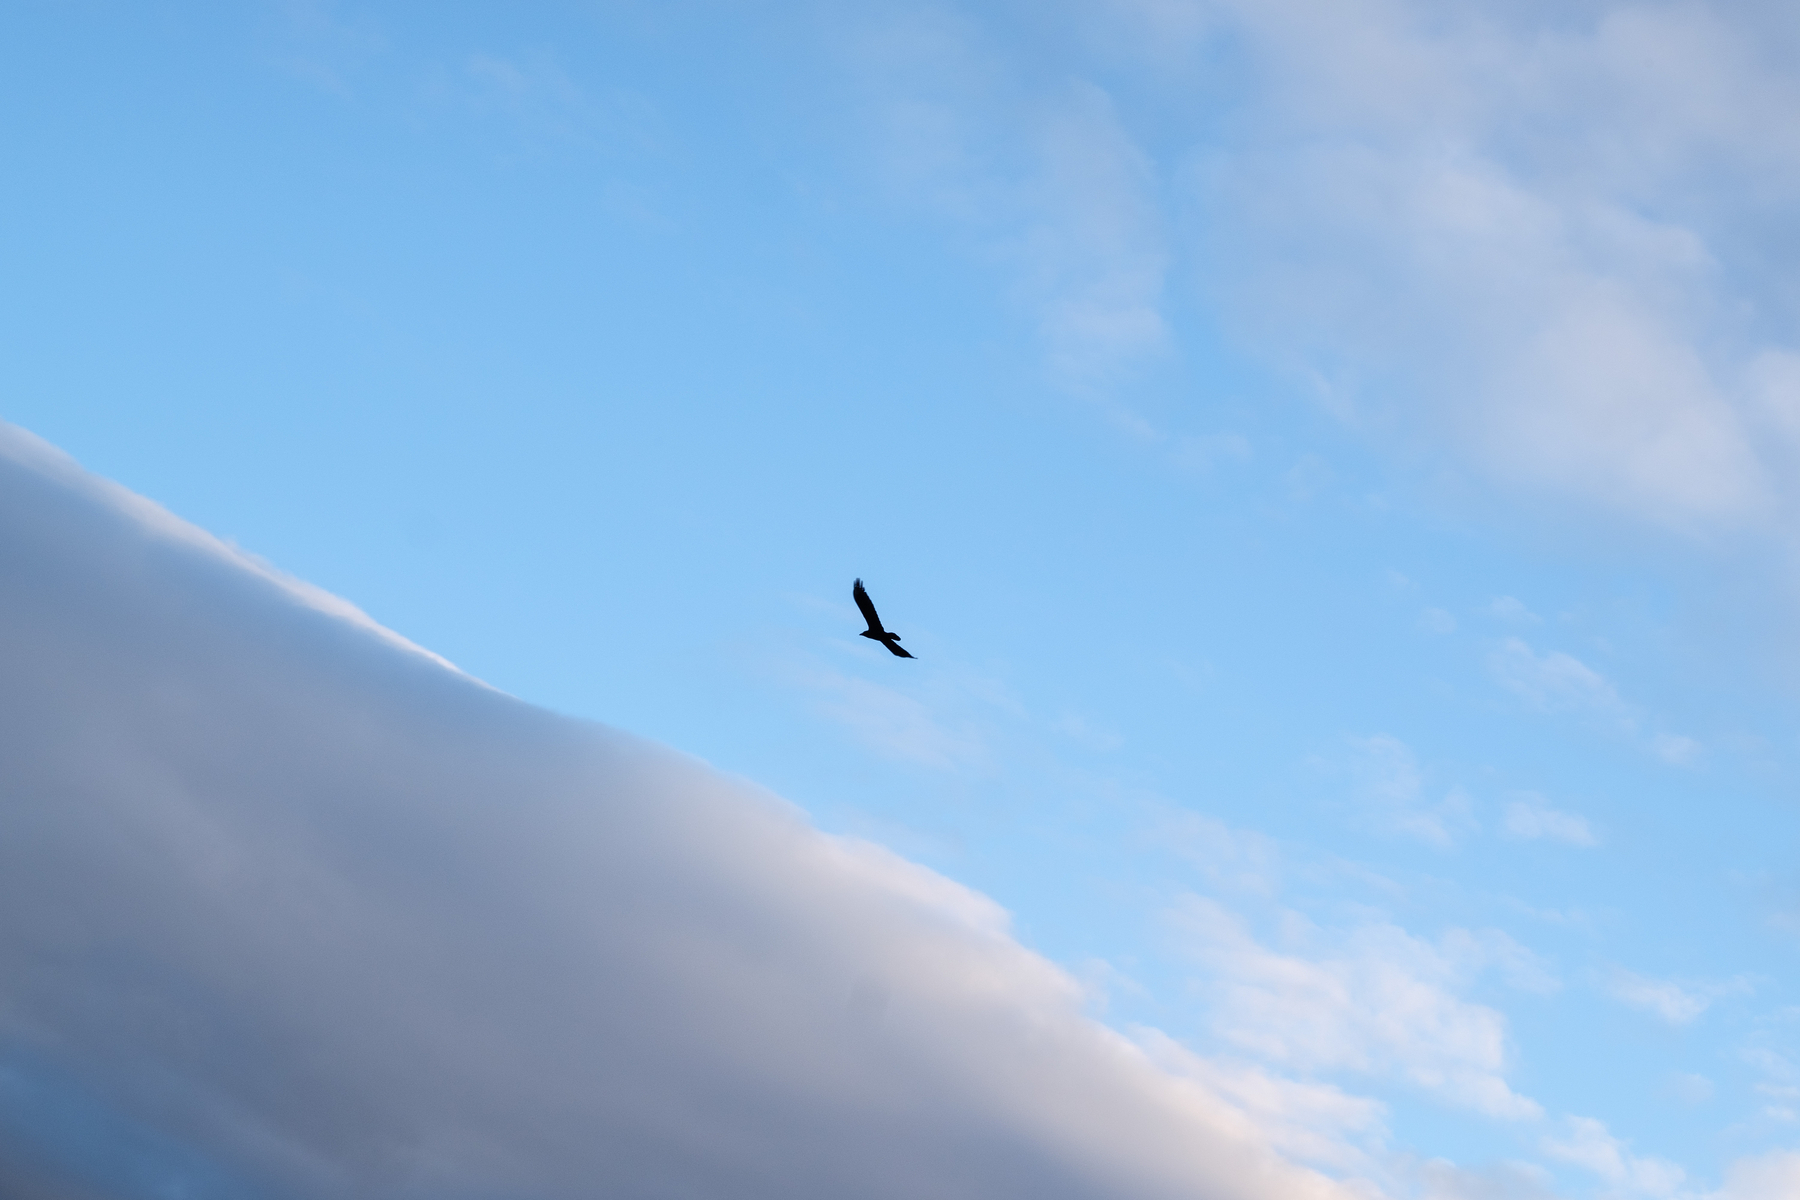 A raven flying next to a cloud